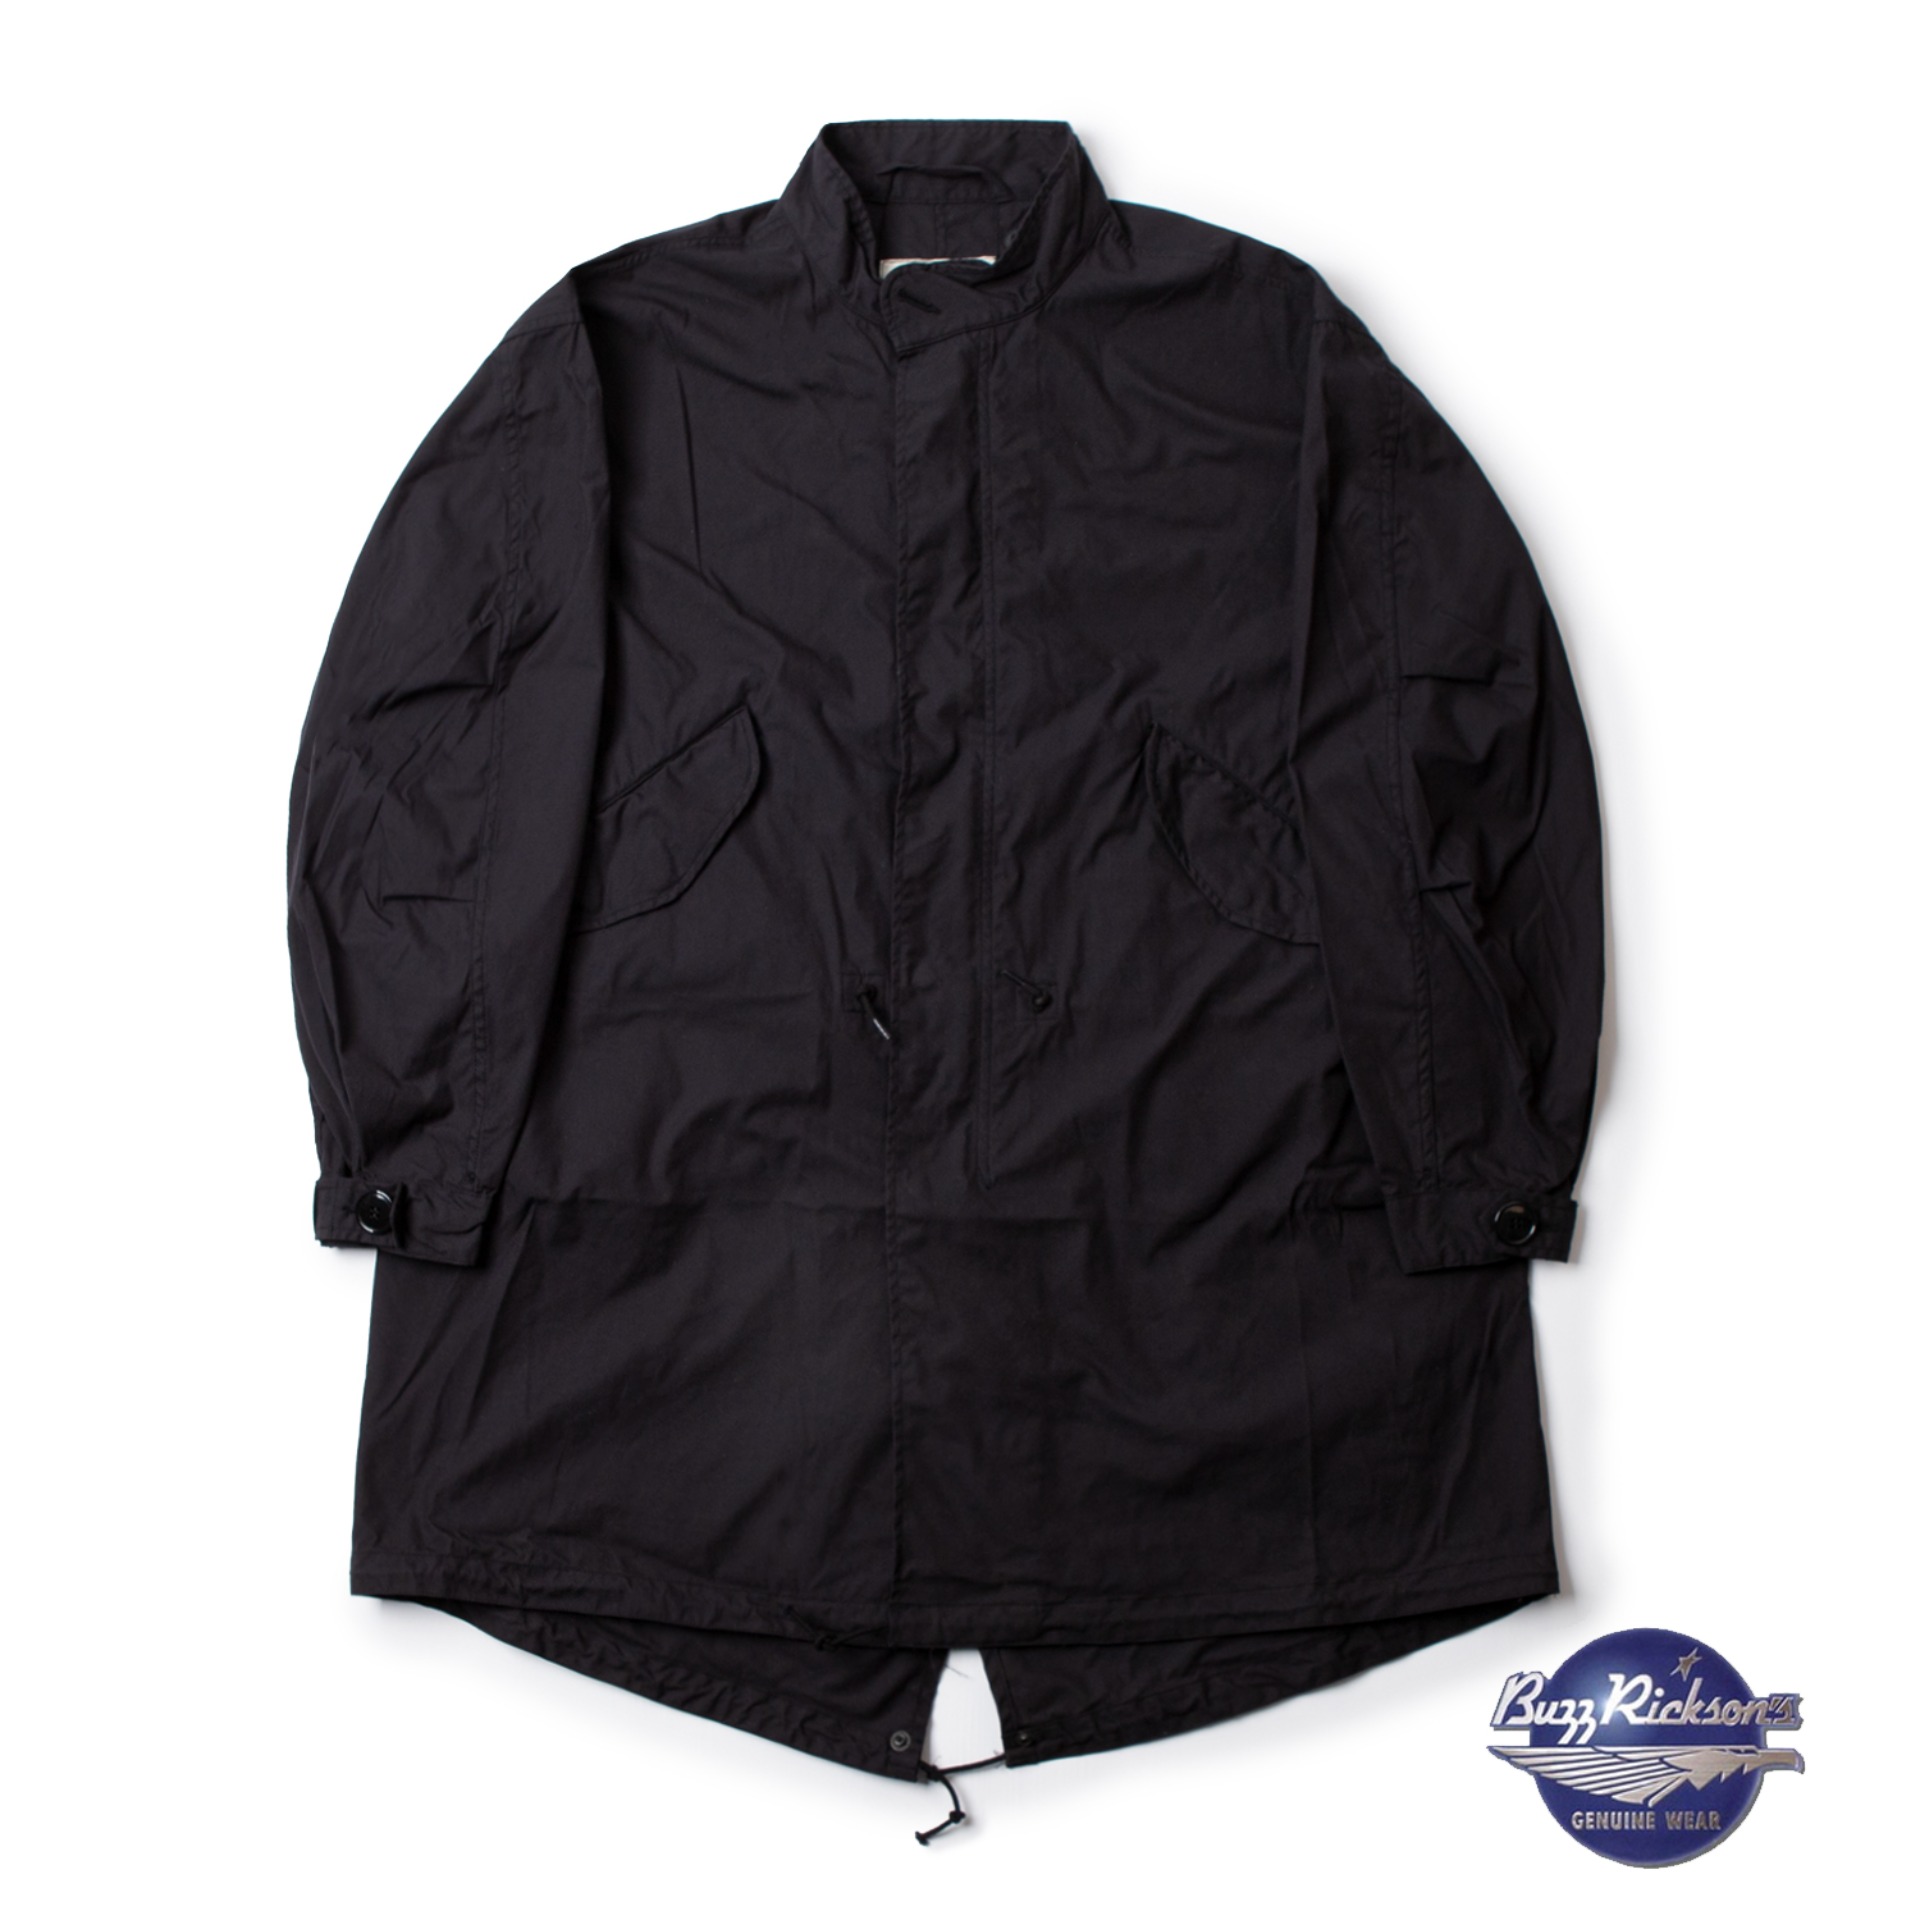 (RESTOCK) BUZZRICKSONS WILLIAM GIBSON COLLECTION Type BLACK HOOD, EXTREME COLD WEATHER M-65 (No Hood) (Black)